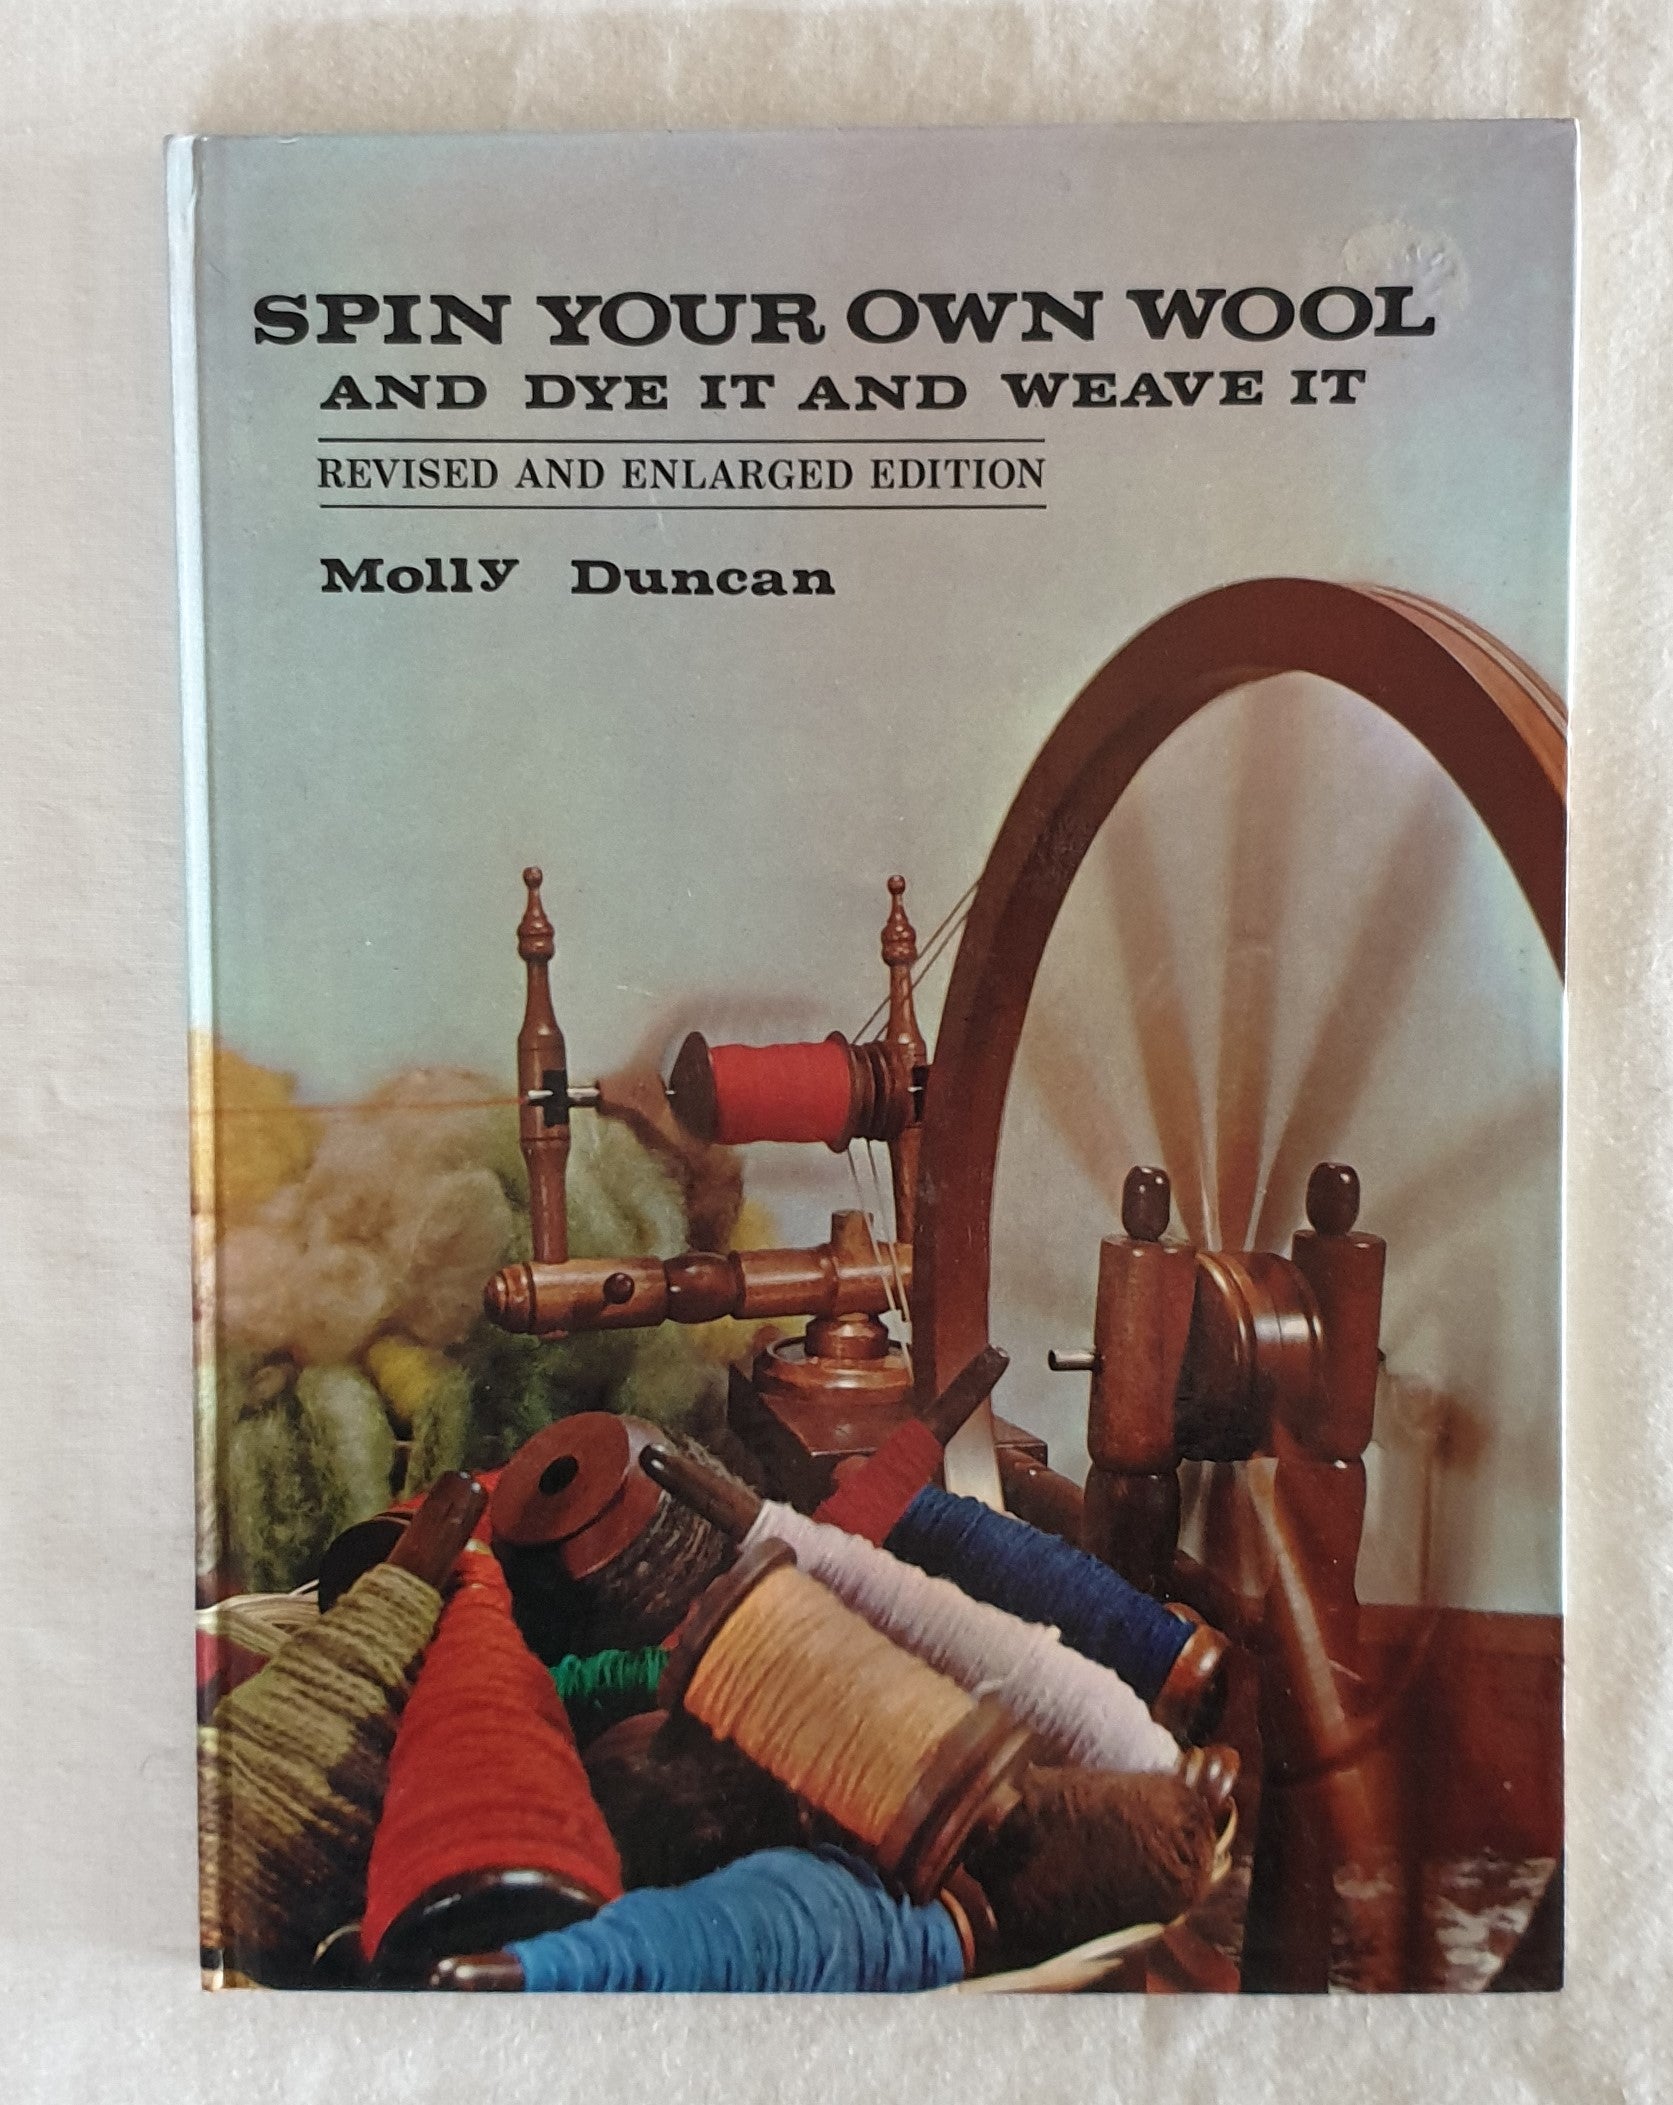 Spin Your Own Wool by Molly Duncan